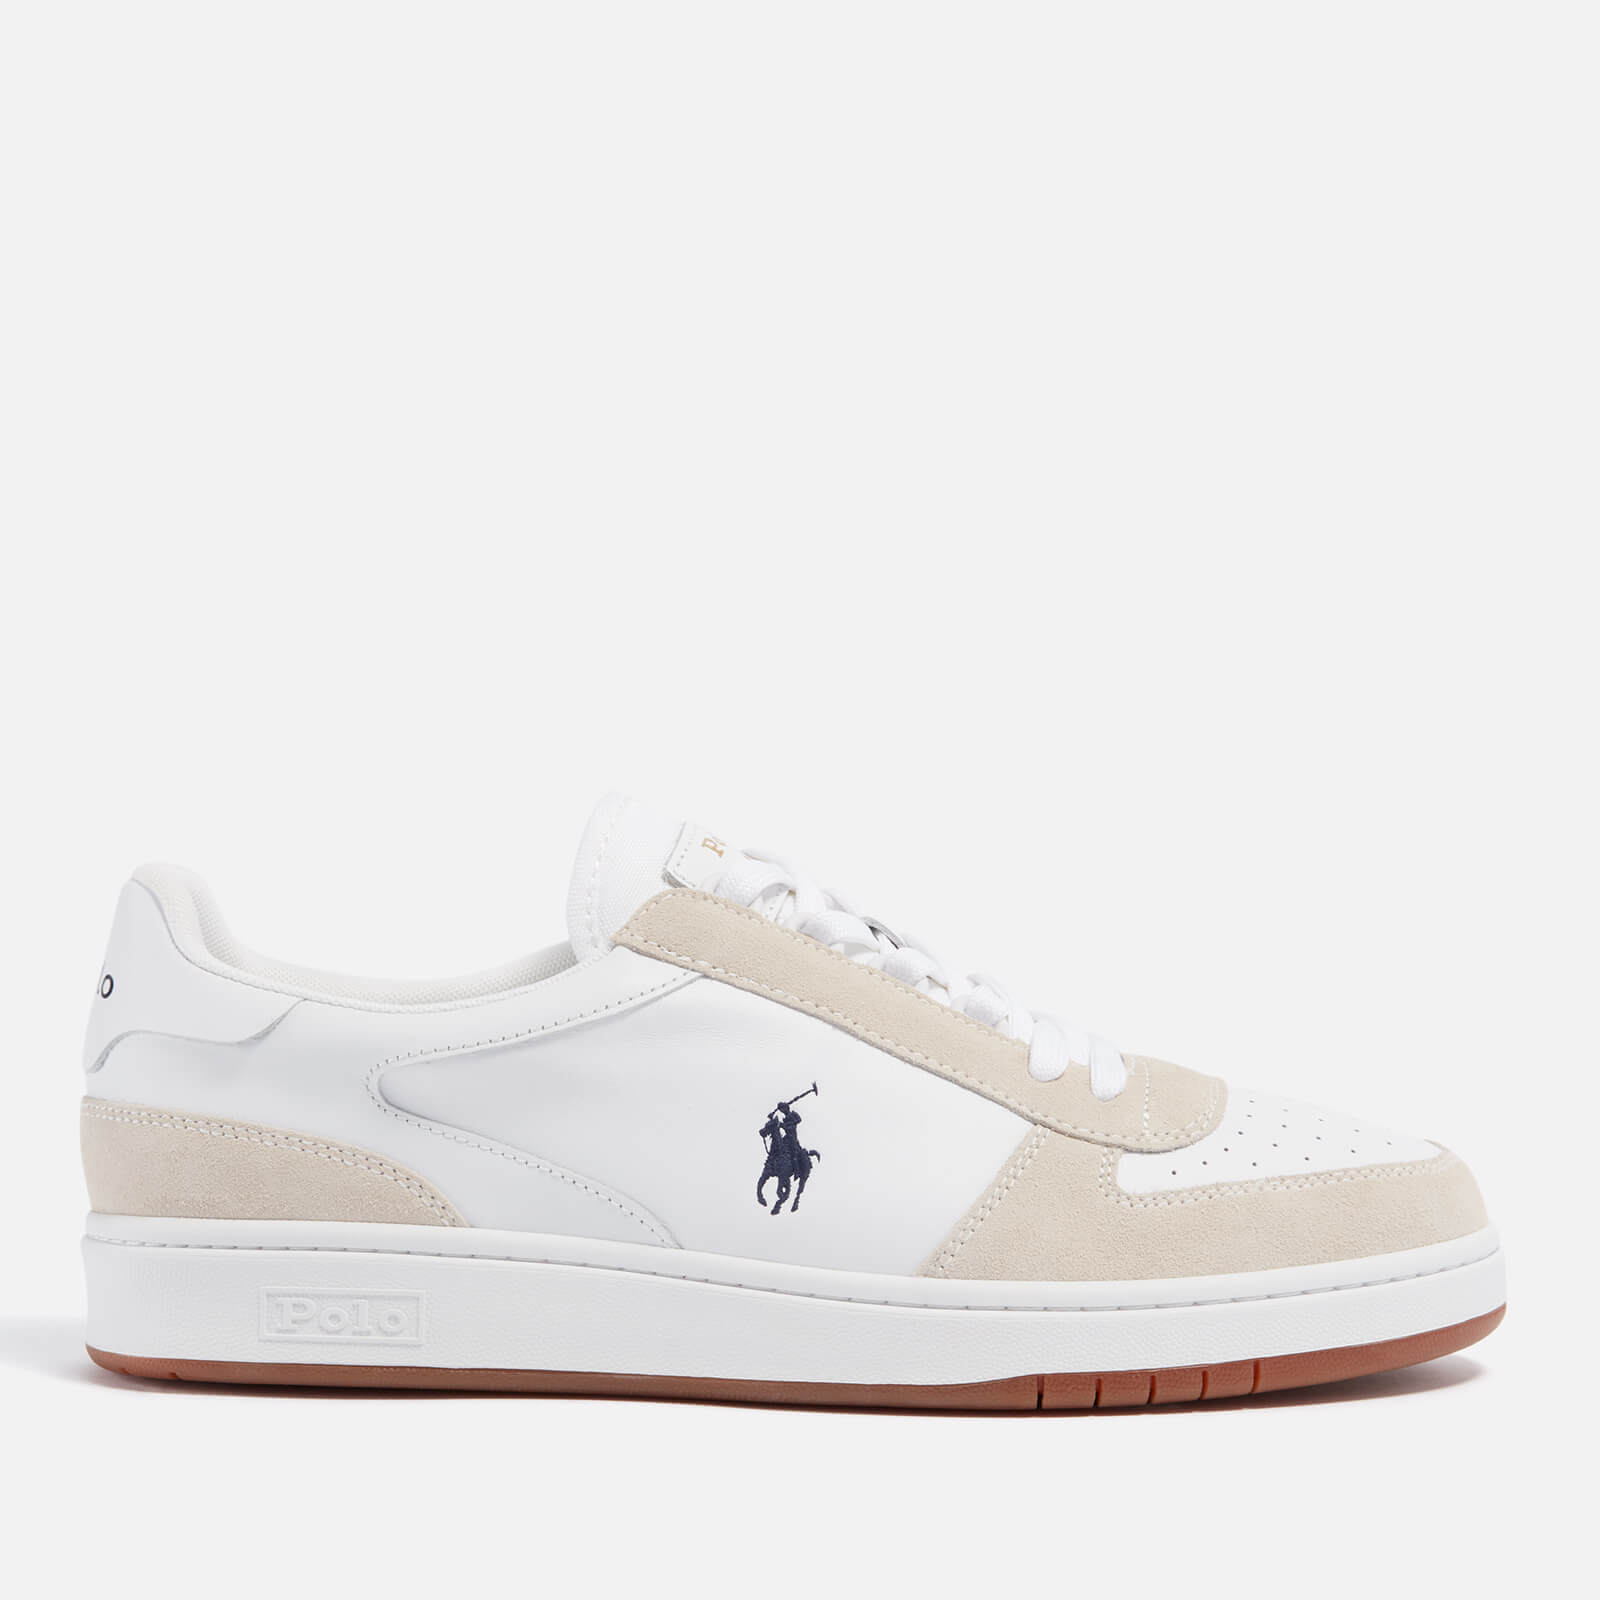 Polo Ralph Lauren Men’s Polo Court Leather/Suede Trainers - White/Newport Navy PP